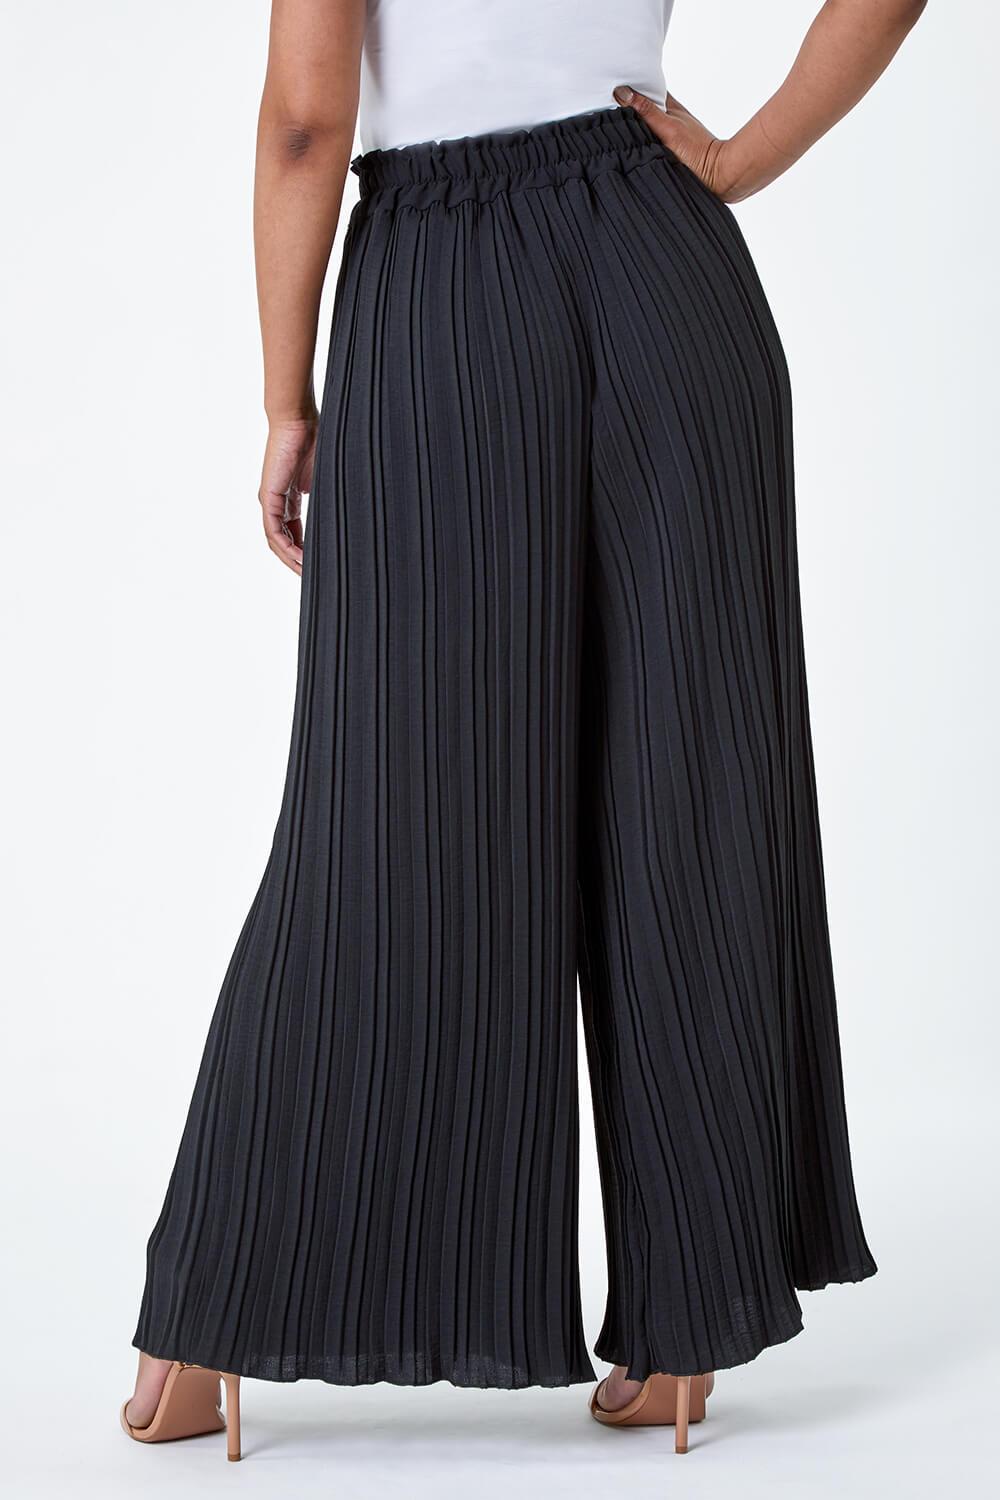 Black Petite Pleated Wide Leg Trousers, Image 3 of 5